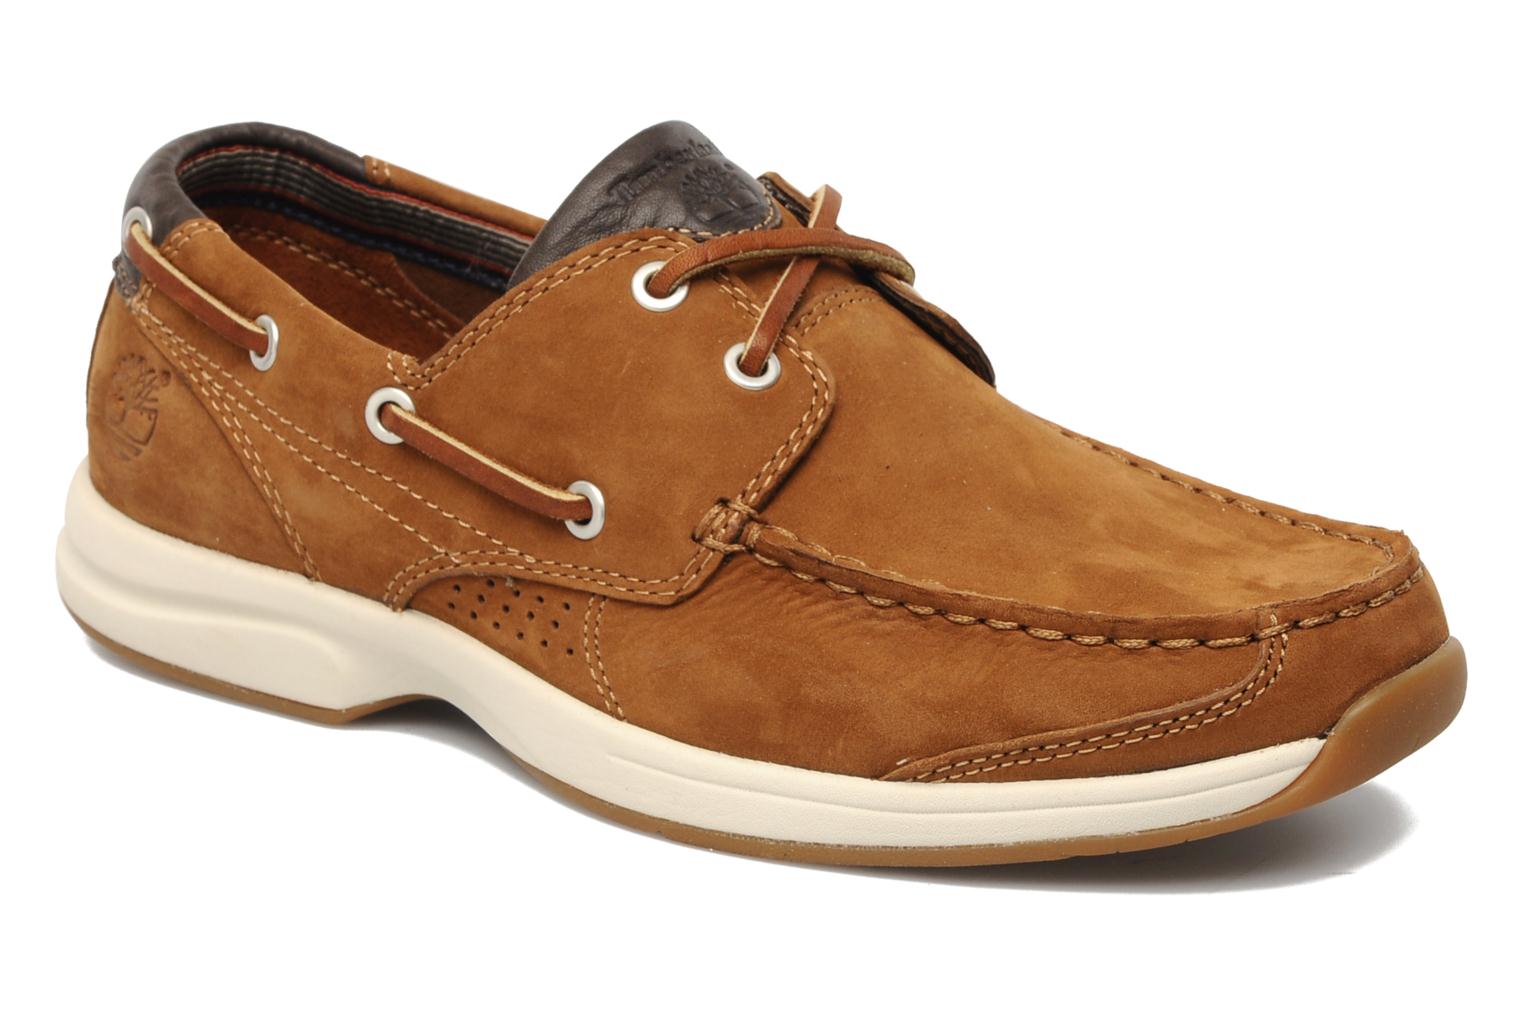 Foto Náuticos Timberland Earthkeepers Hull's Cove 2 Eye Hombre